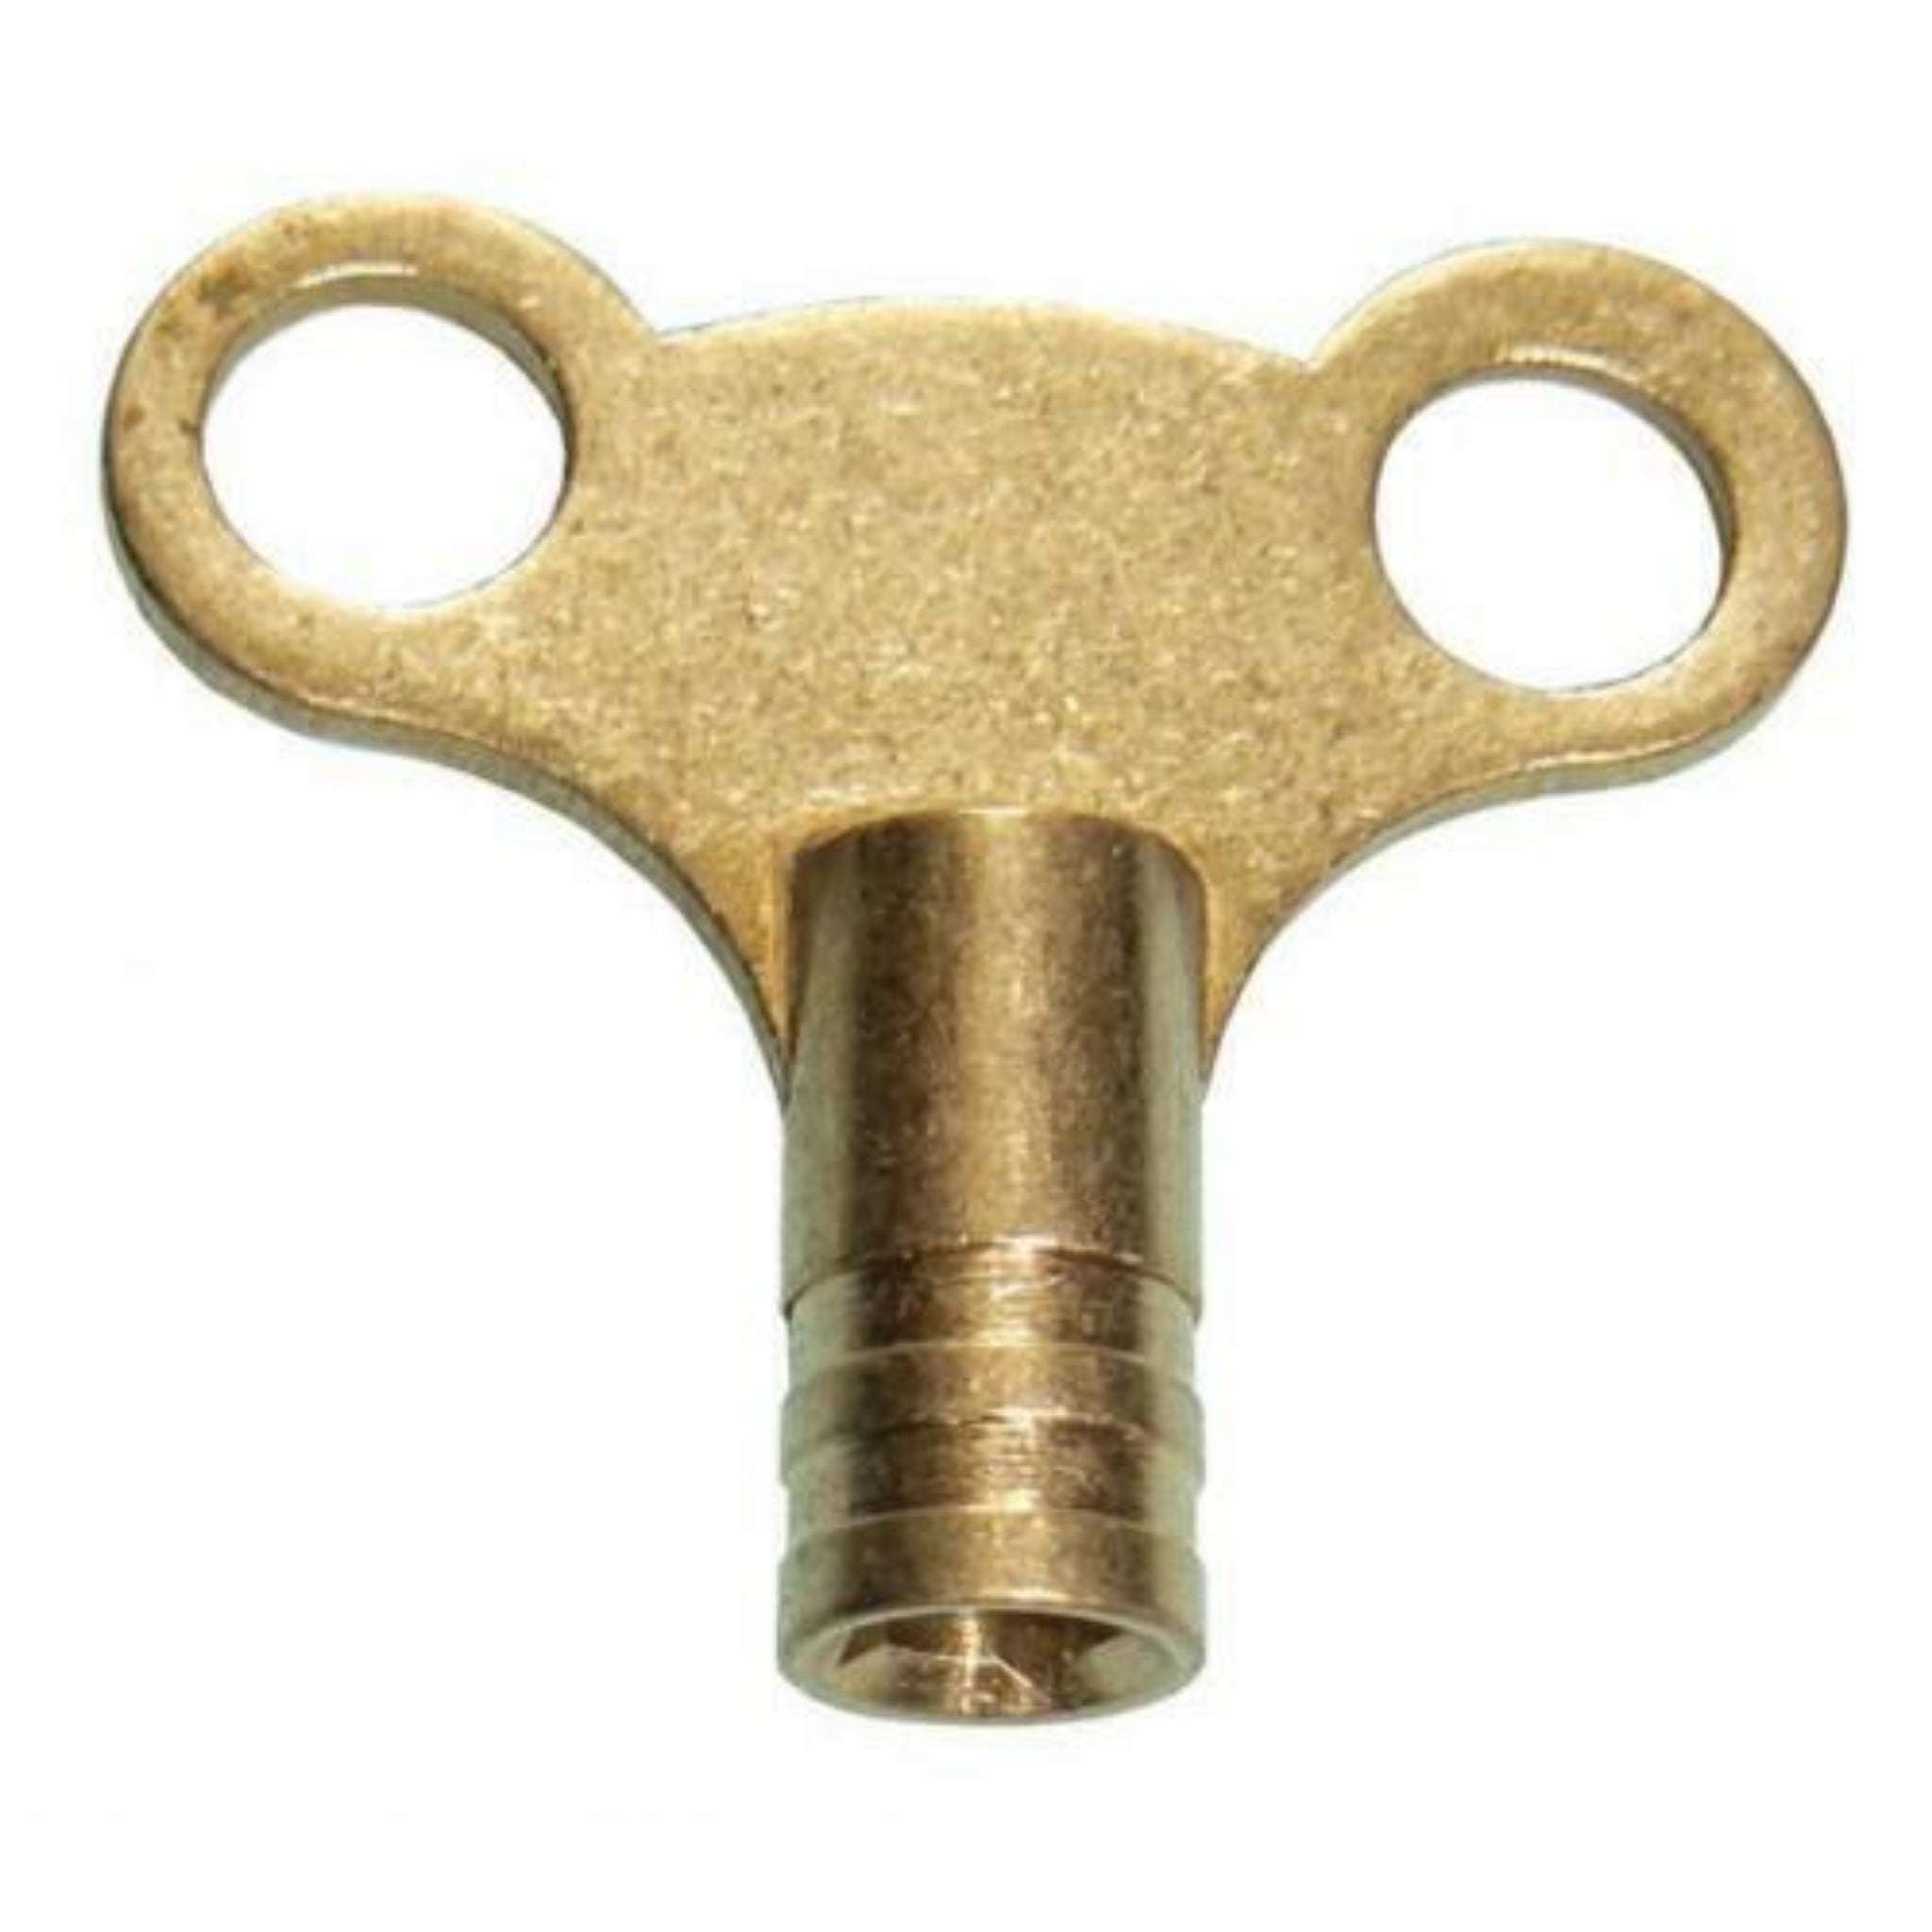 Beclen Harp 4x Solid Brass Radiator Bleed Keys-Perfect Plumbing Tool For Venting Air Valves